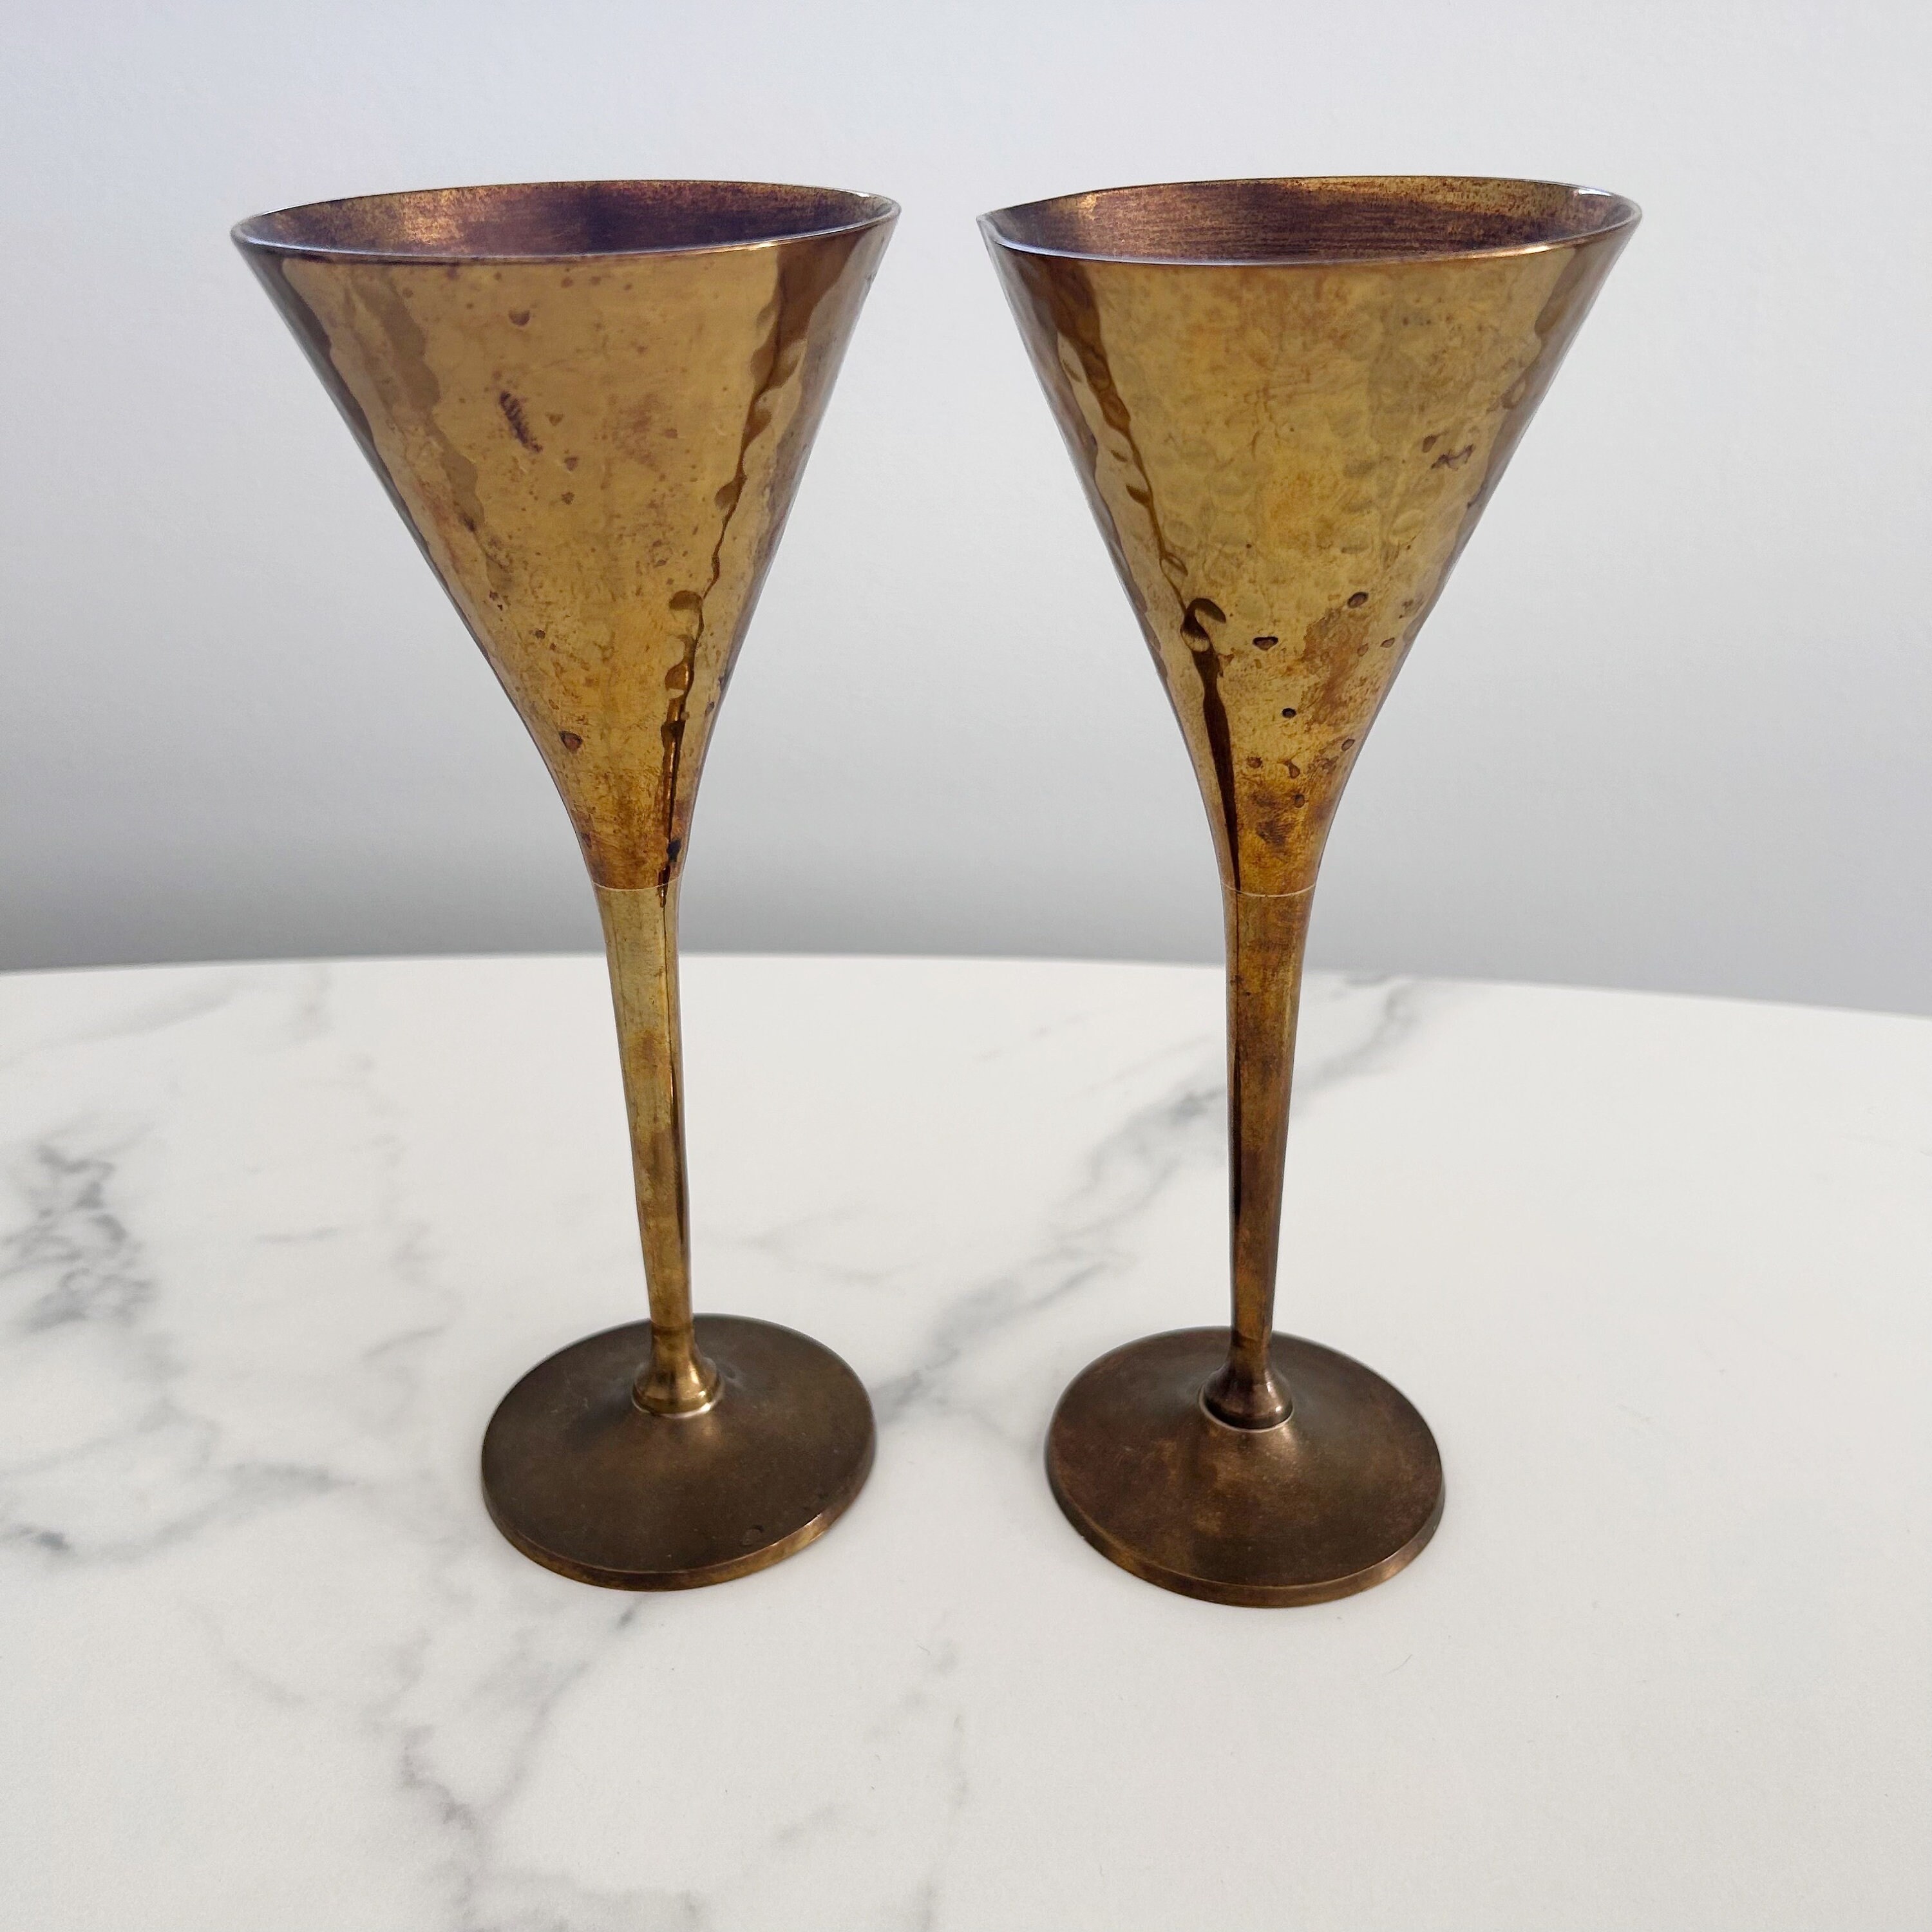 2 Vintage Solid Brass Wine Goblets With Tulip Stems Made in India